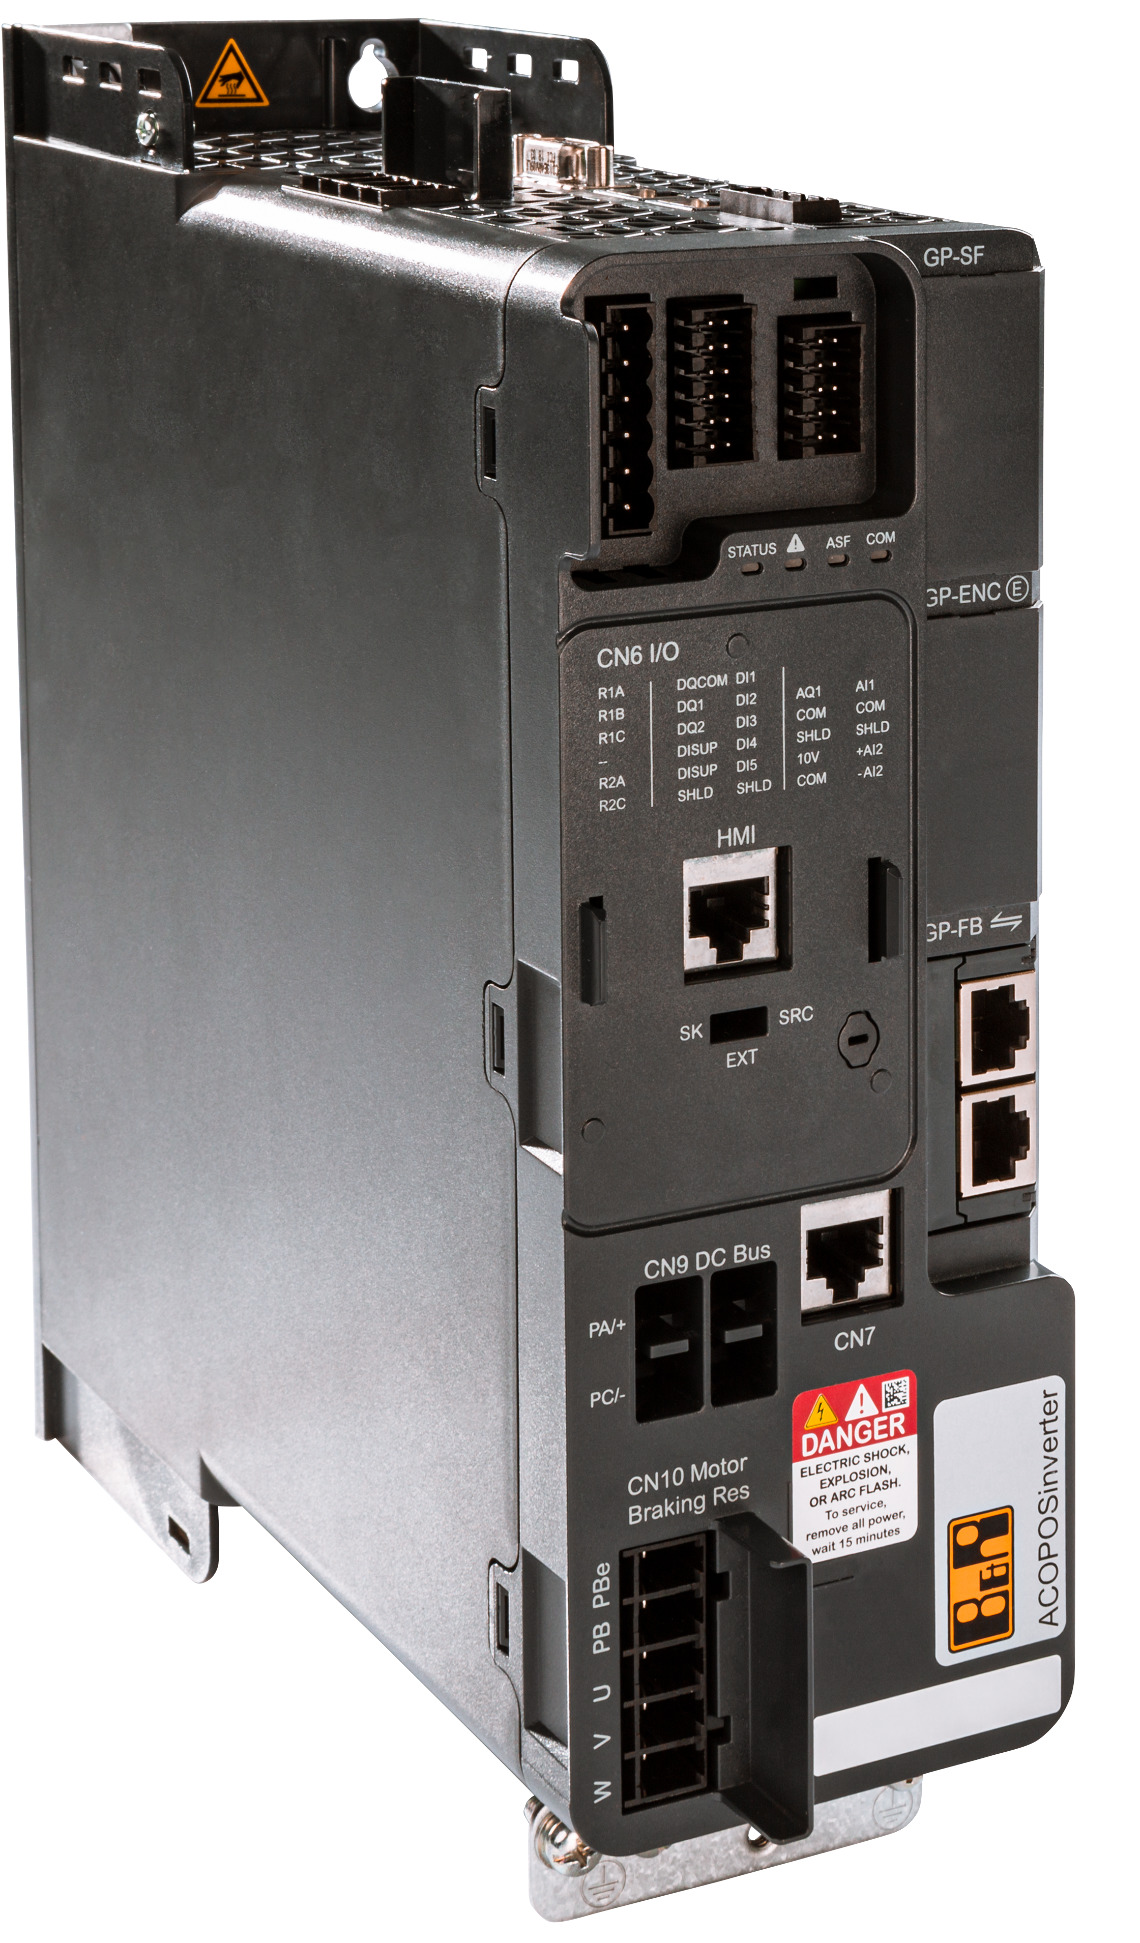 B&R 8I74S200075.0P-000 Inverter with POWERLINK communication card